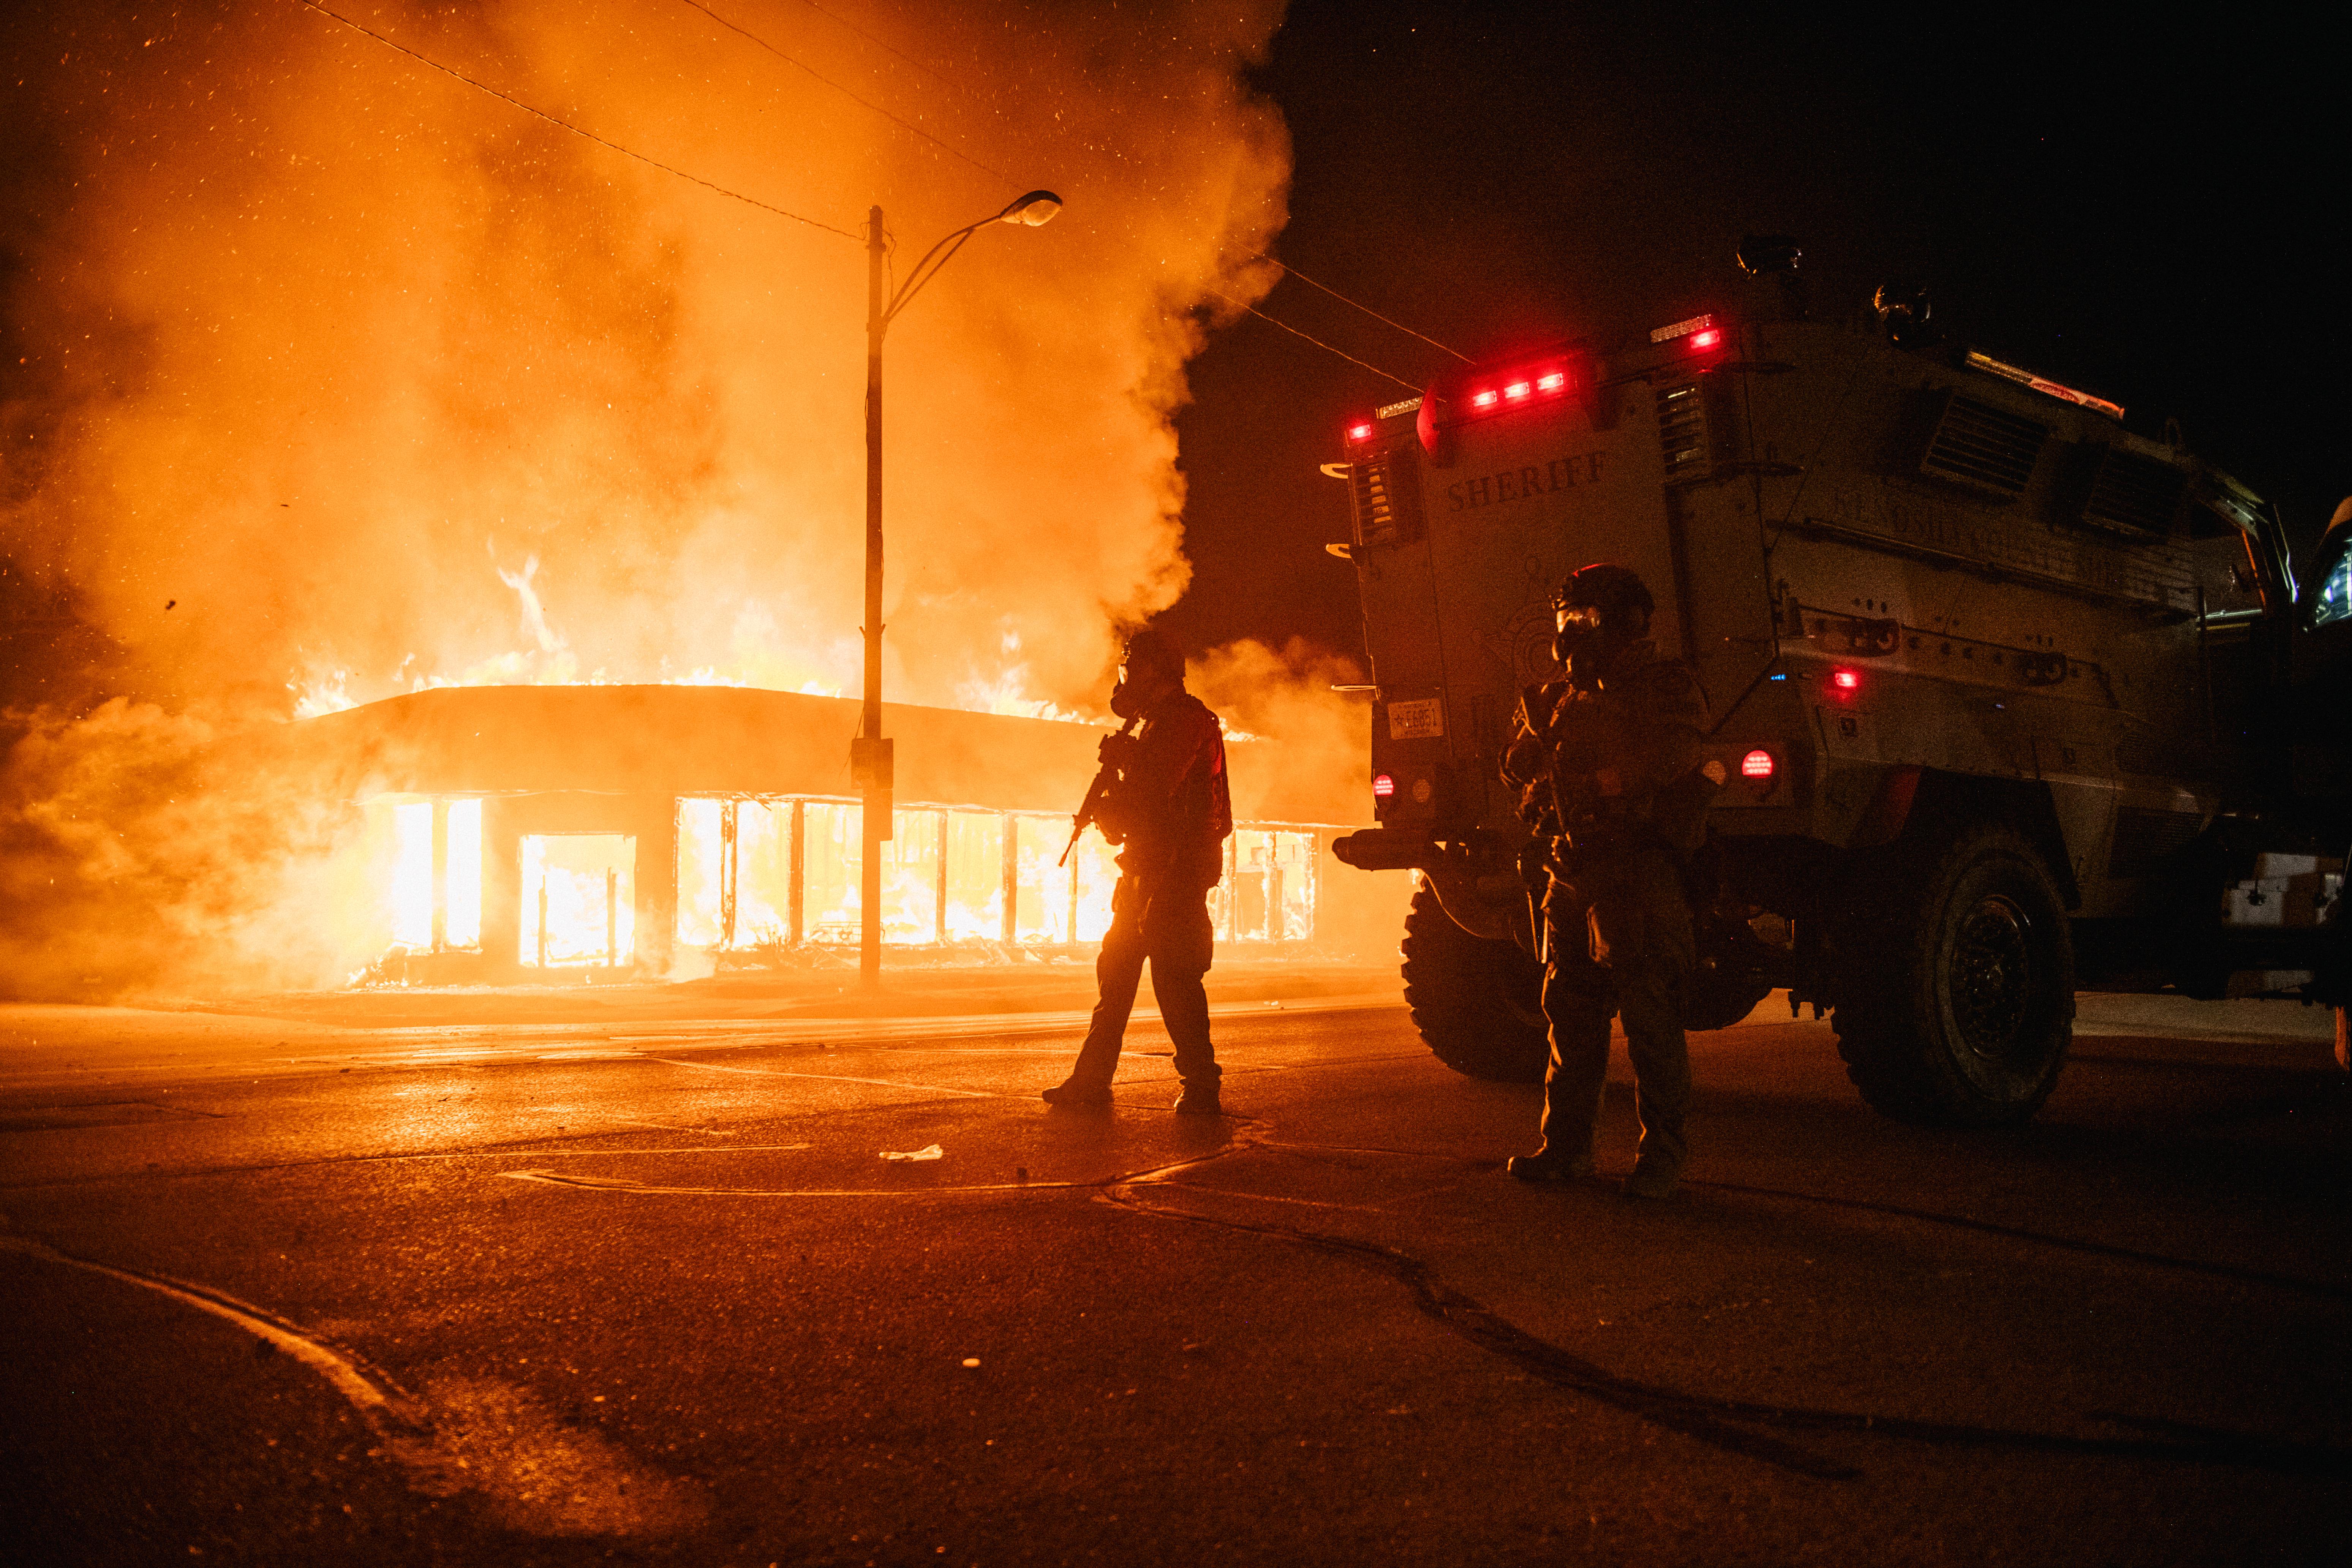 A police armored vehicle patrols an intersection with a building on fire in the background. 